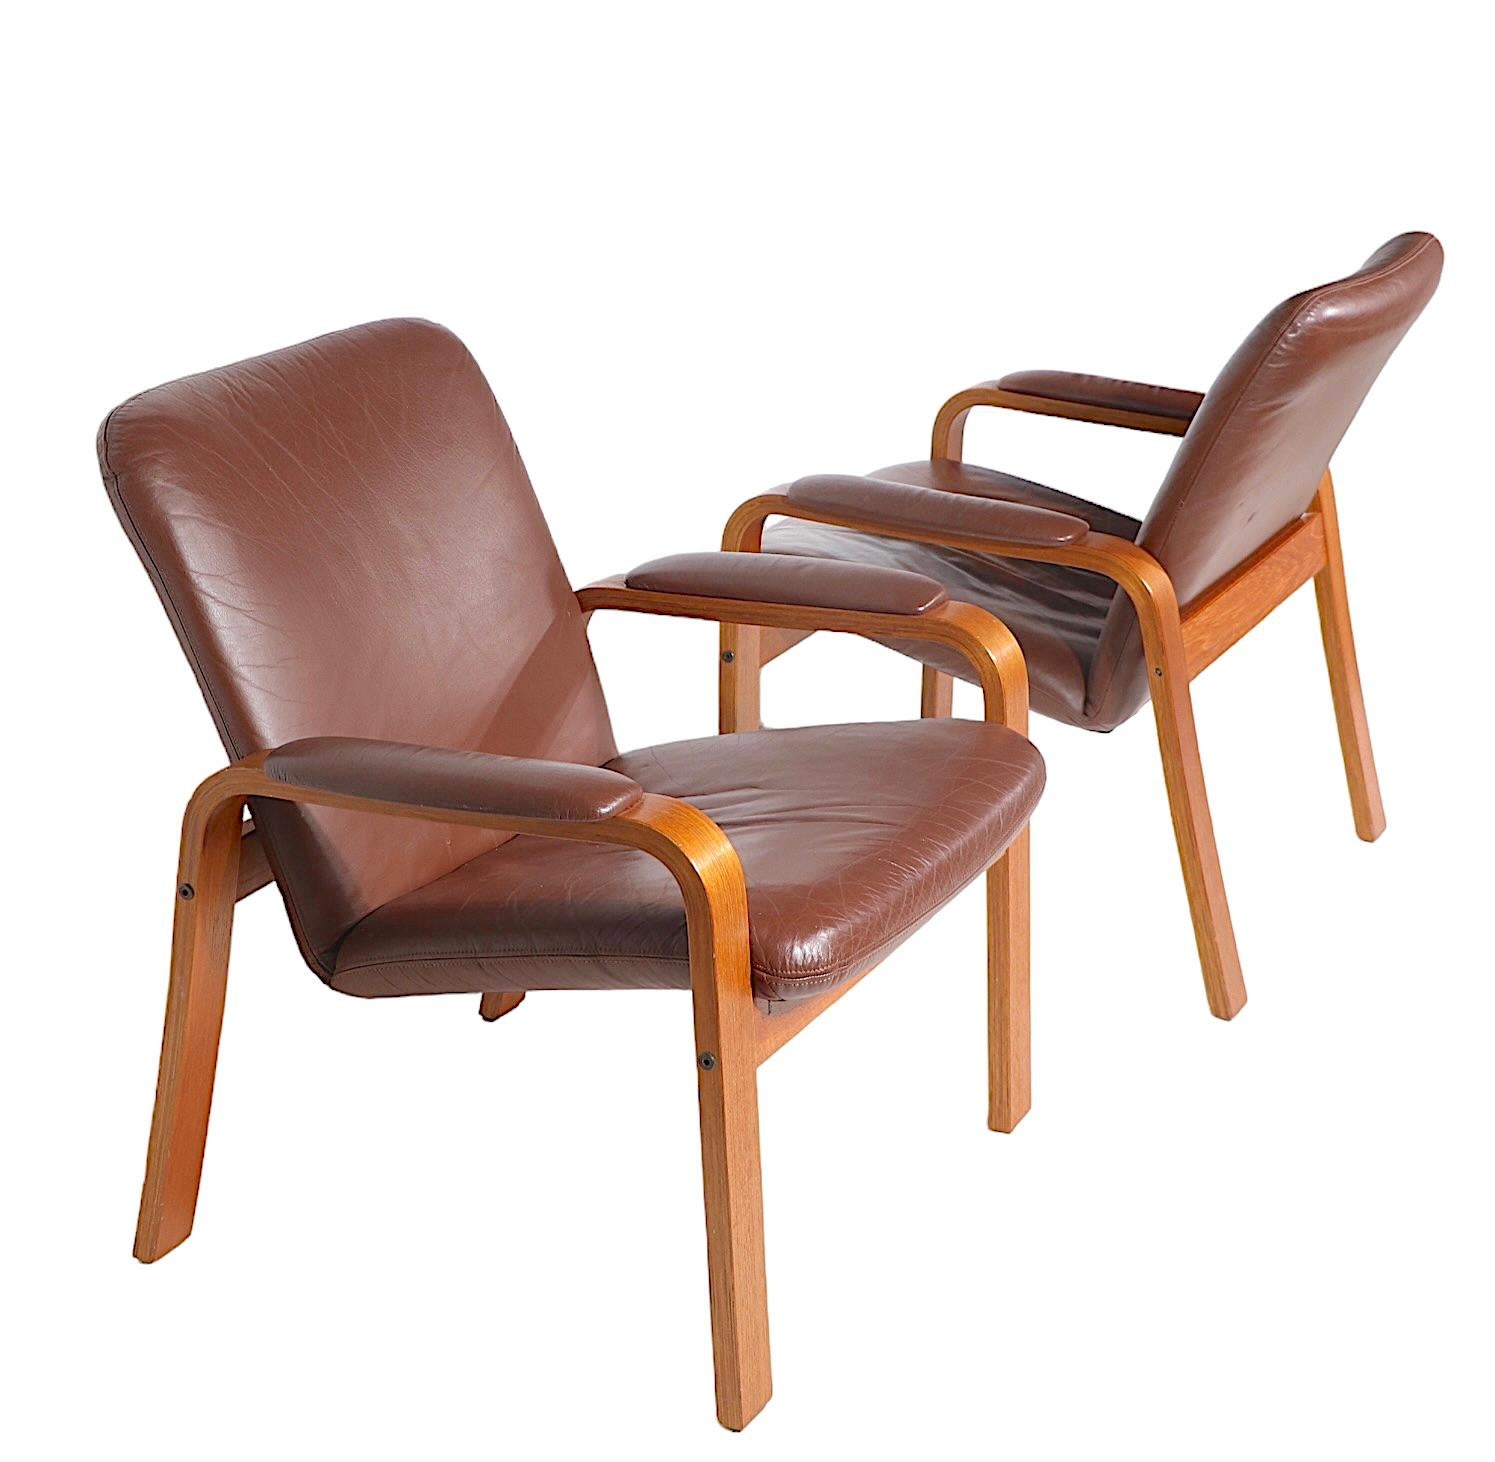 Pr. Scandinavian Mid Century Modern Lounge Arm Chairs Made in Norway by Ekorness For Sale 1